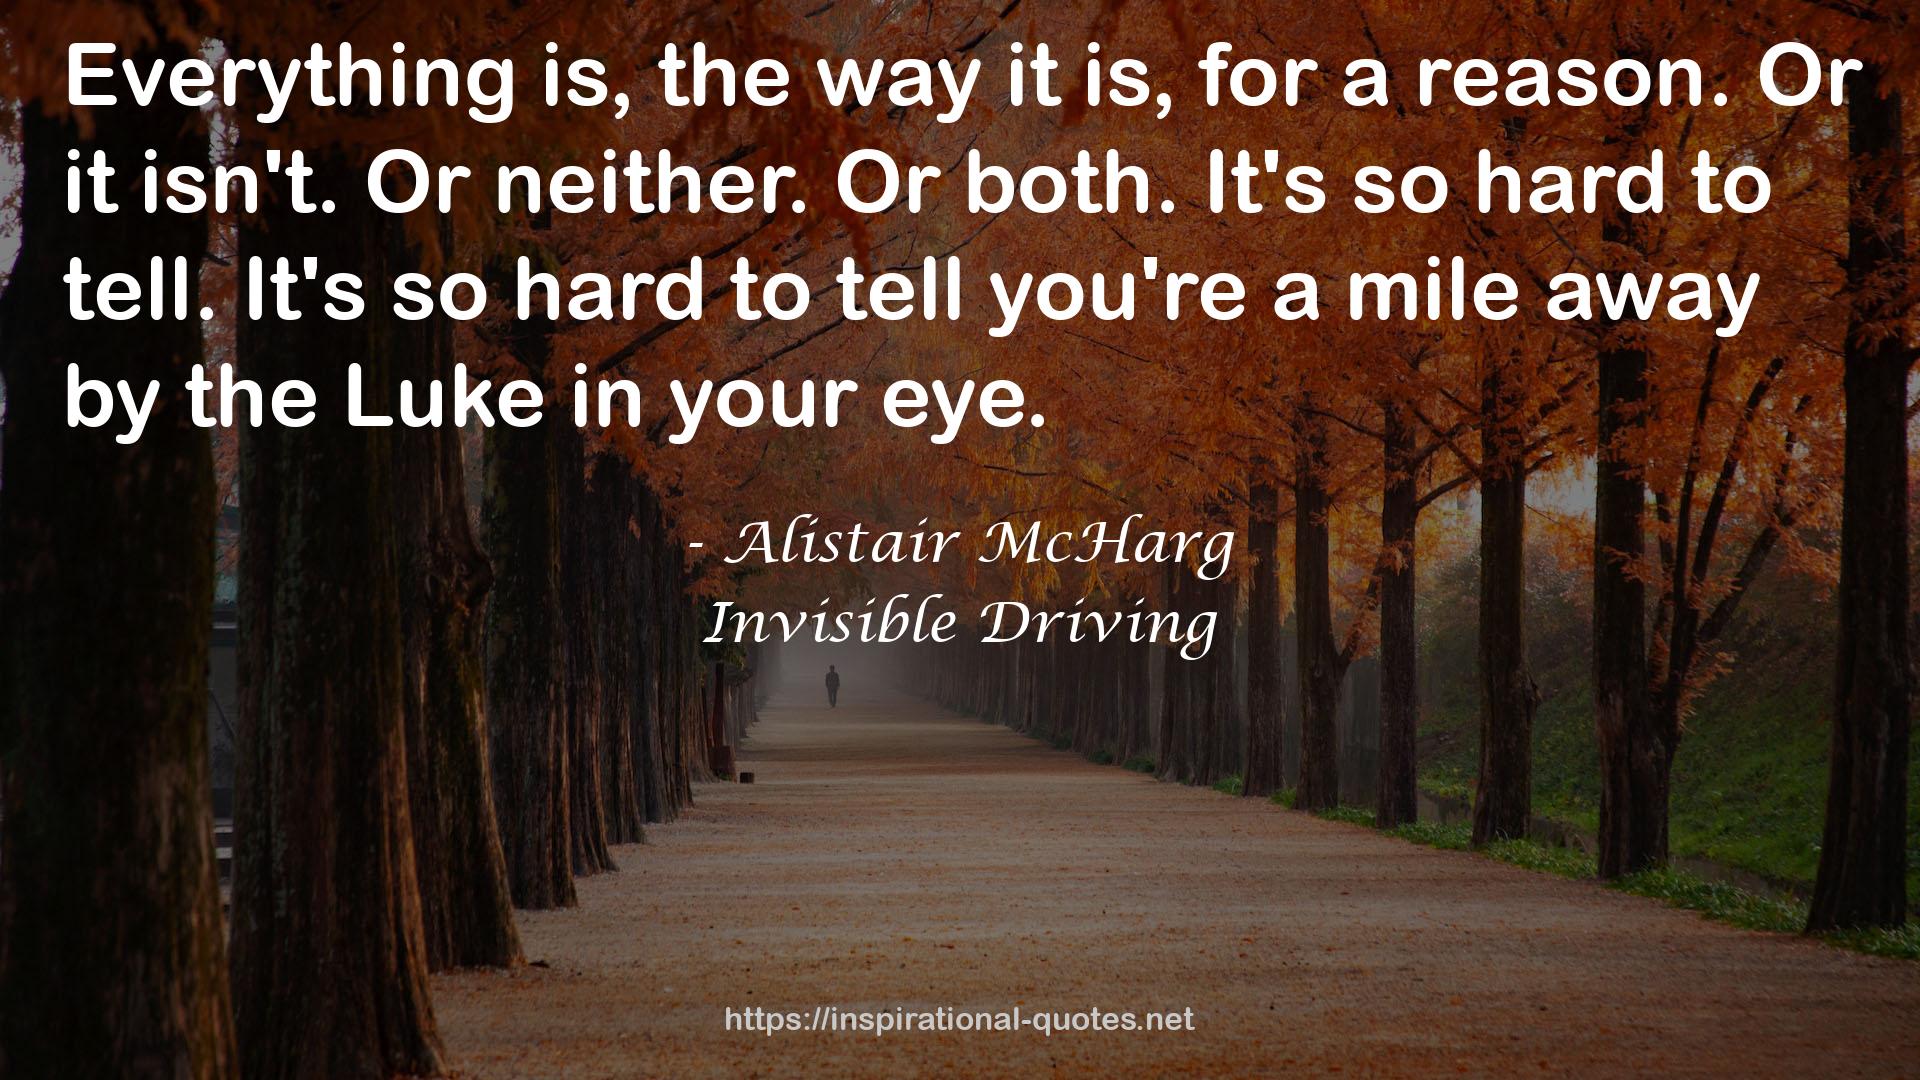 Alistair McHarg QUOTES